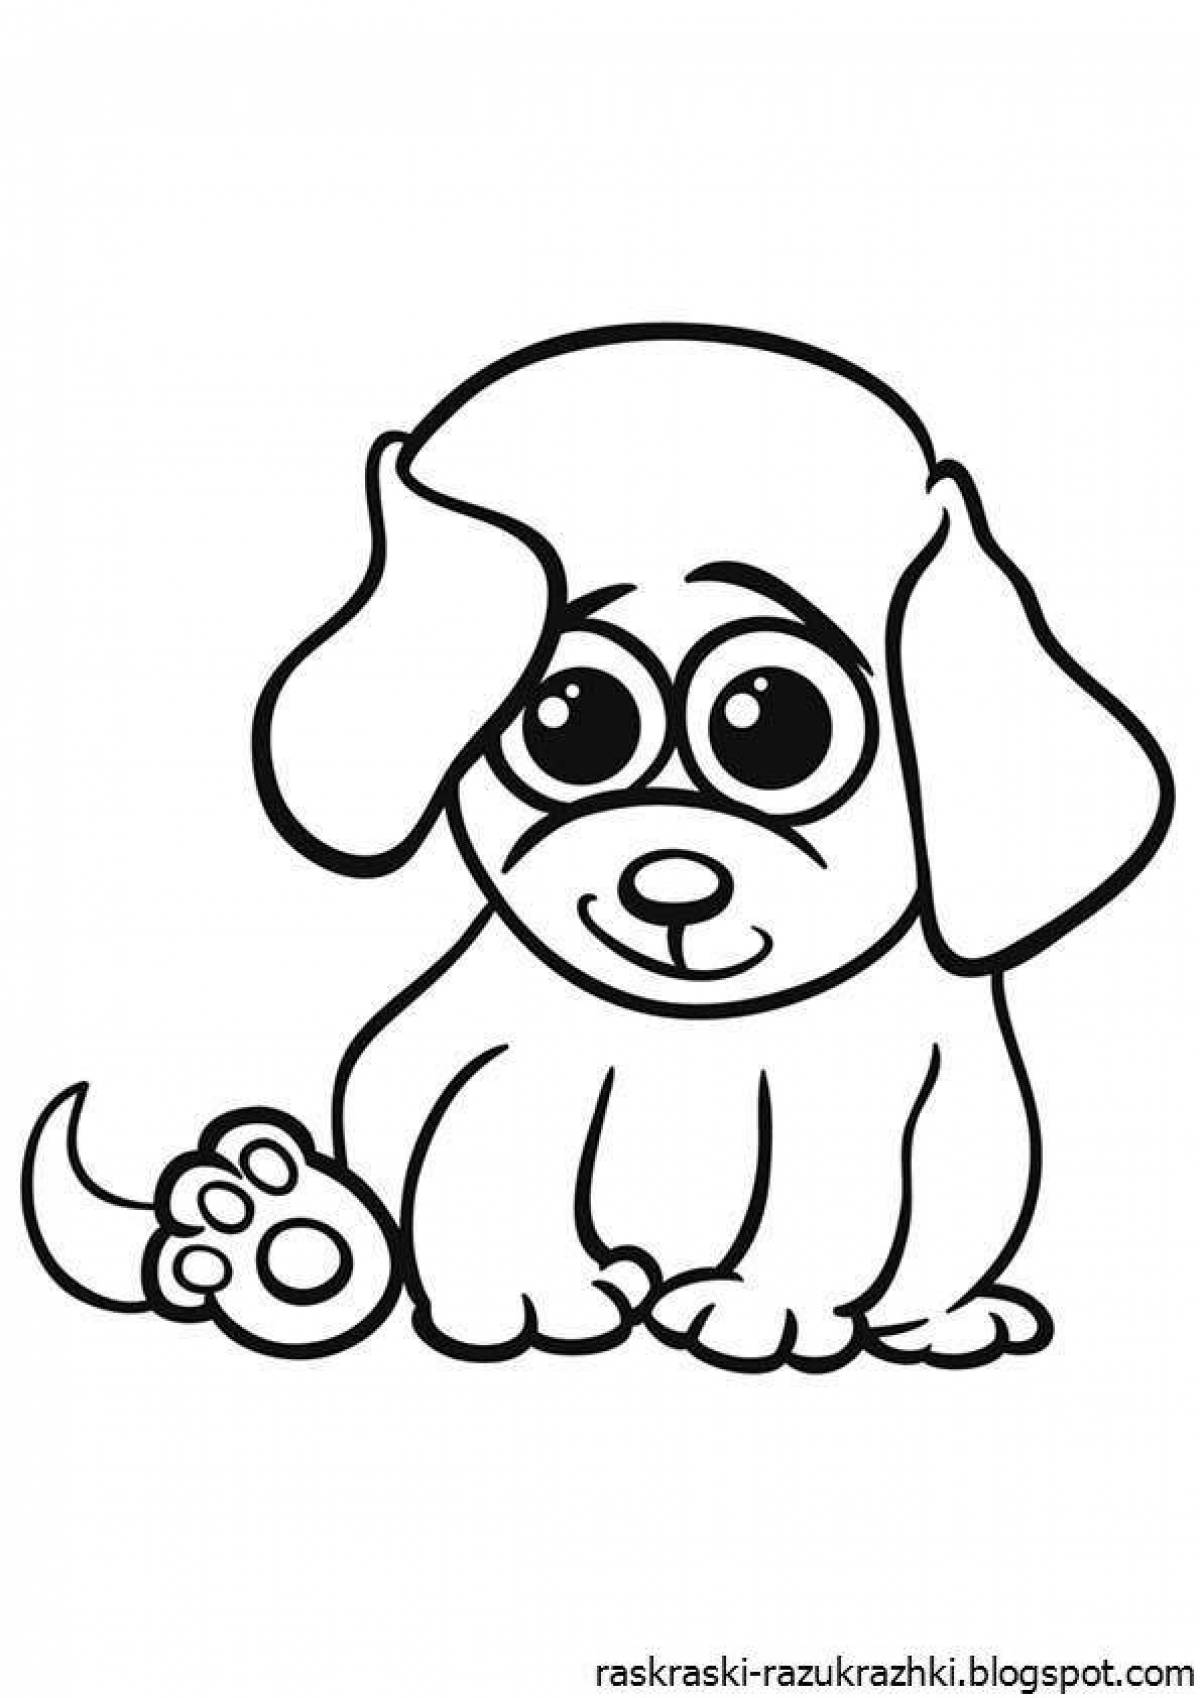 Coloring page naughty cute dog